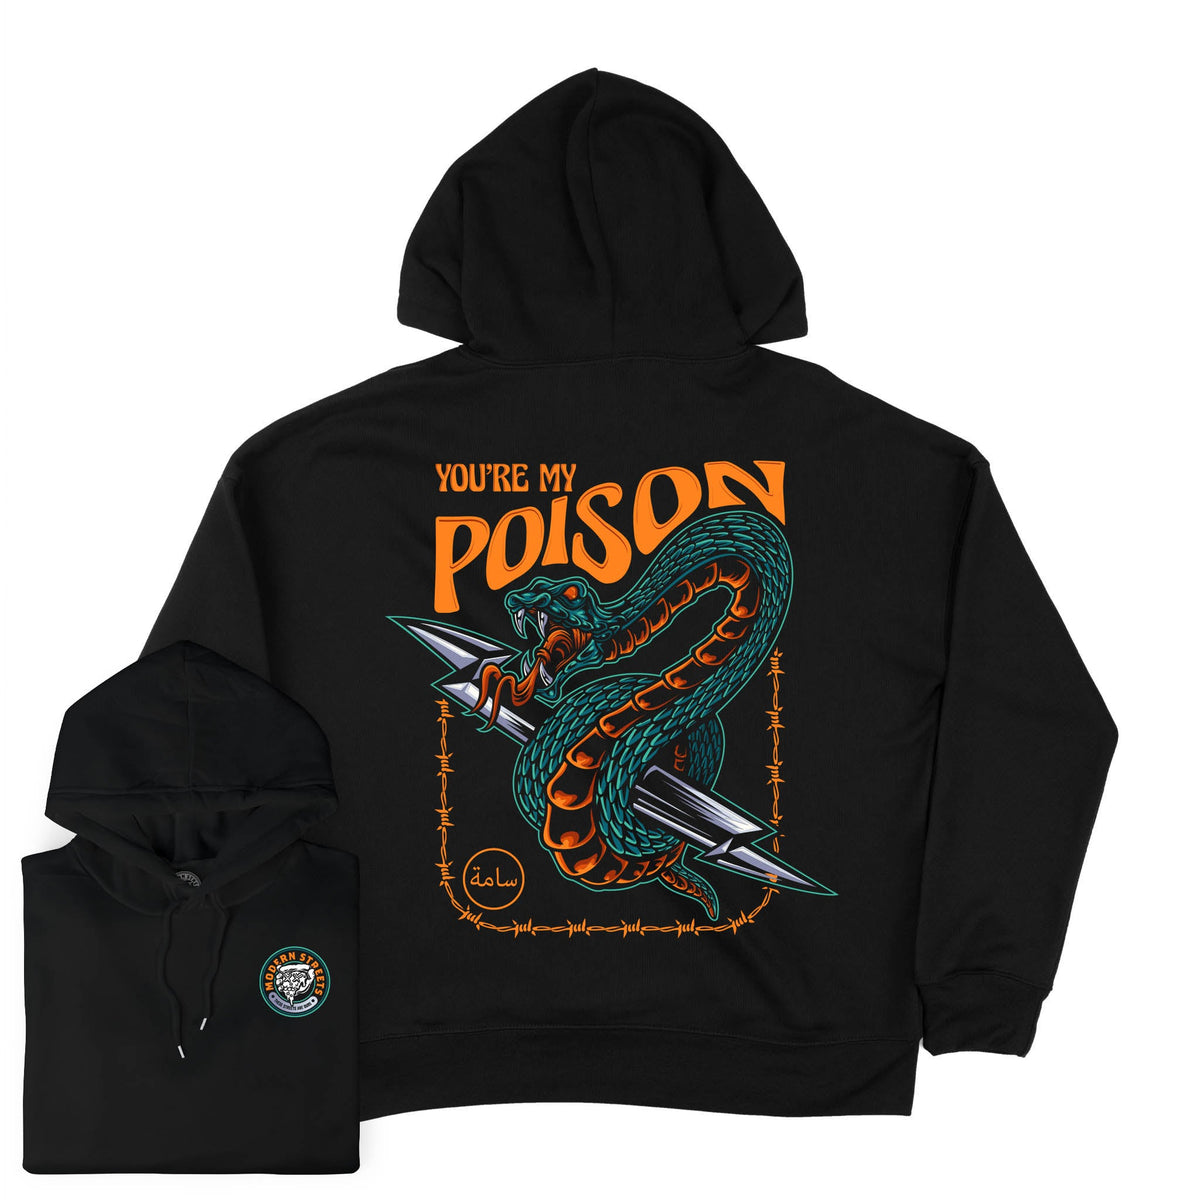 SALE You're My Poison Hoodie